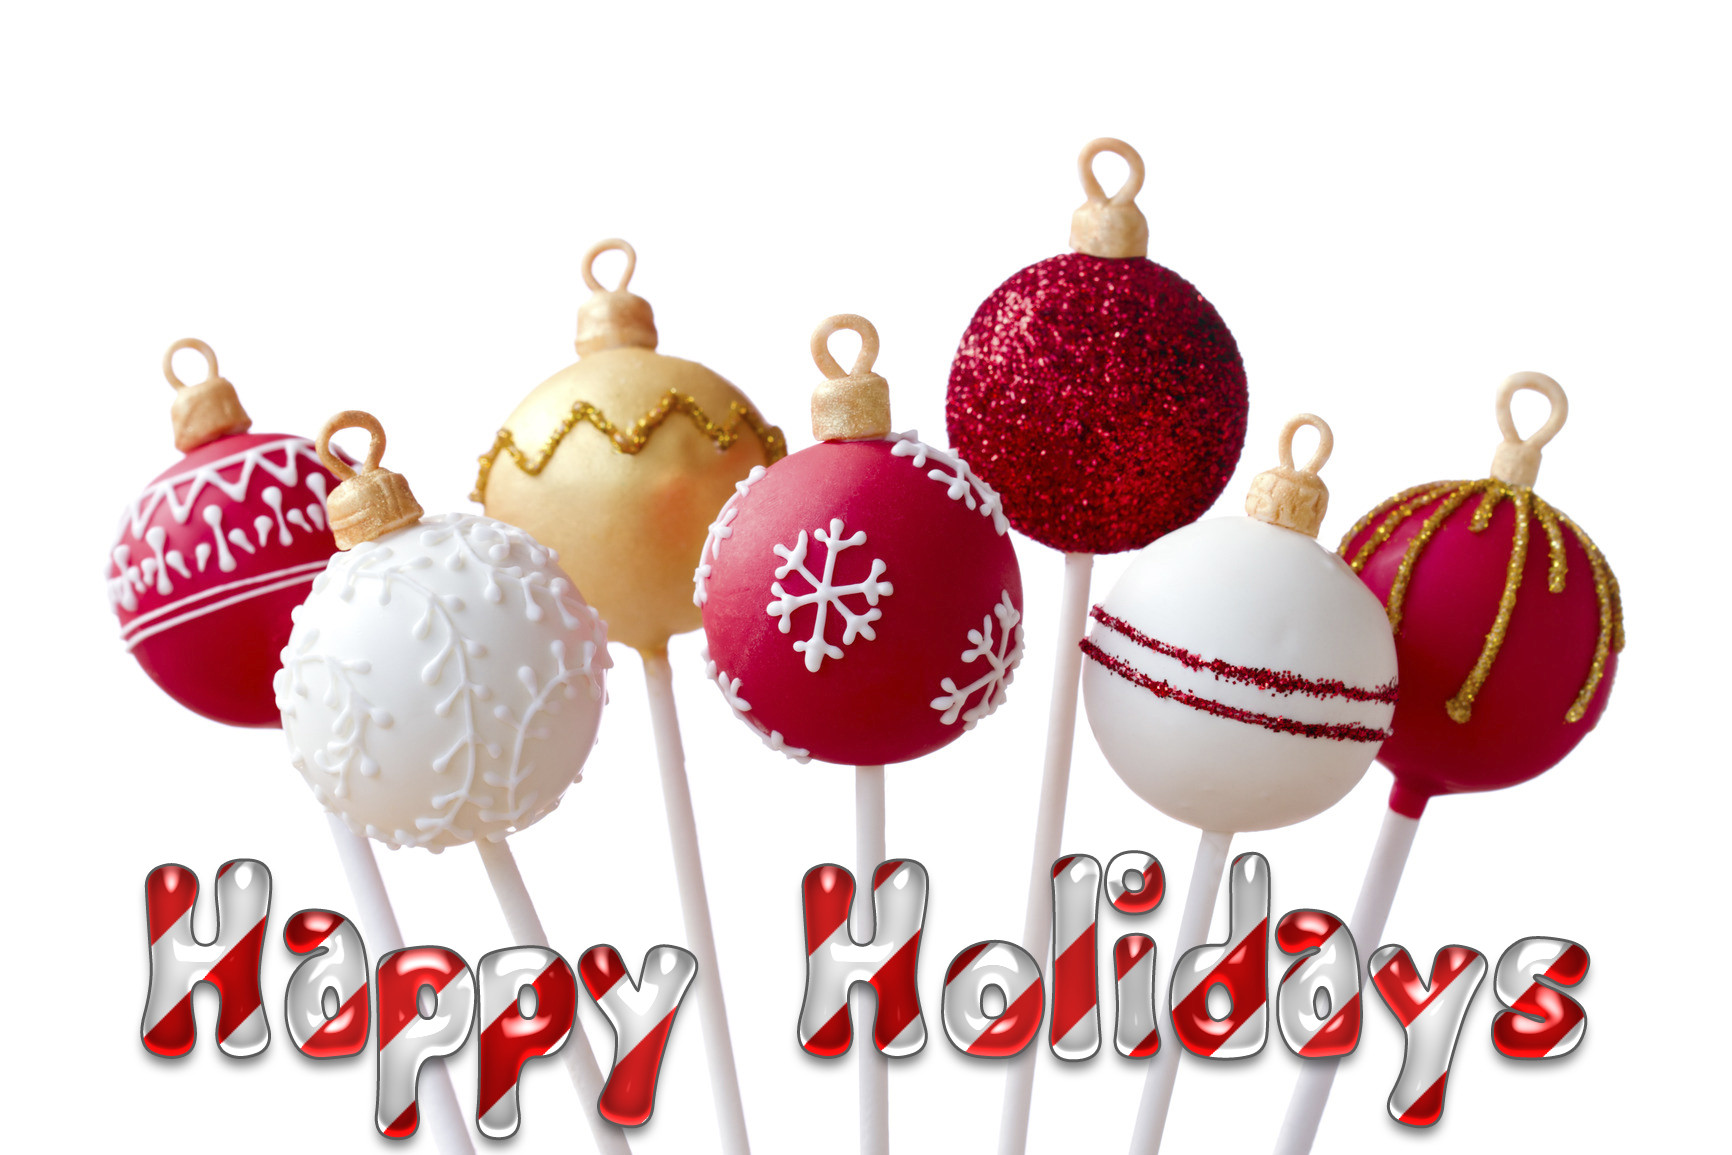 Christmas Cake Pop Ideas
 Send free holiday eCards to friends and family